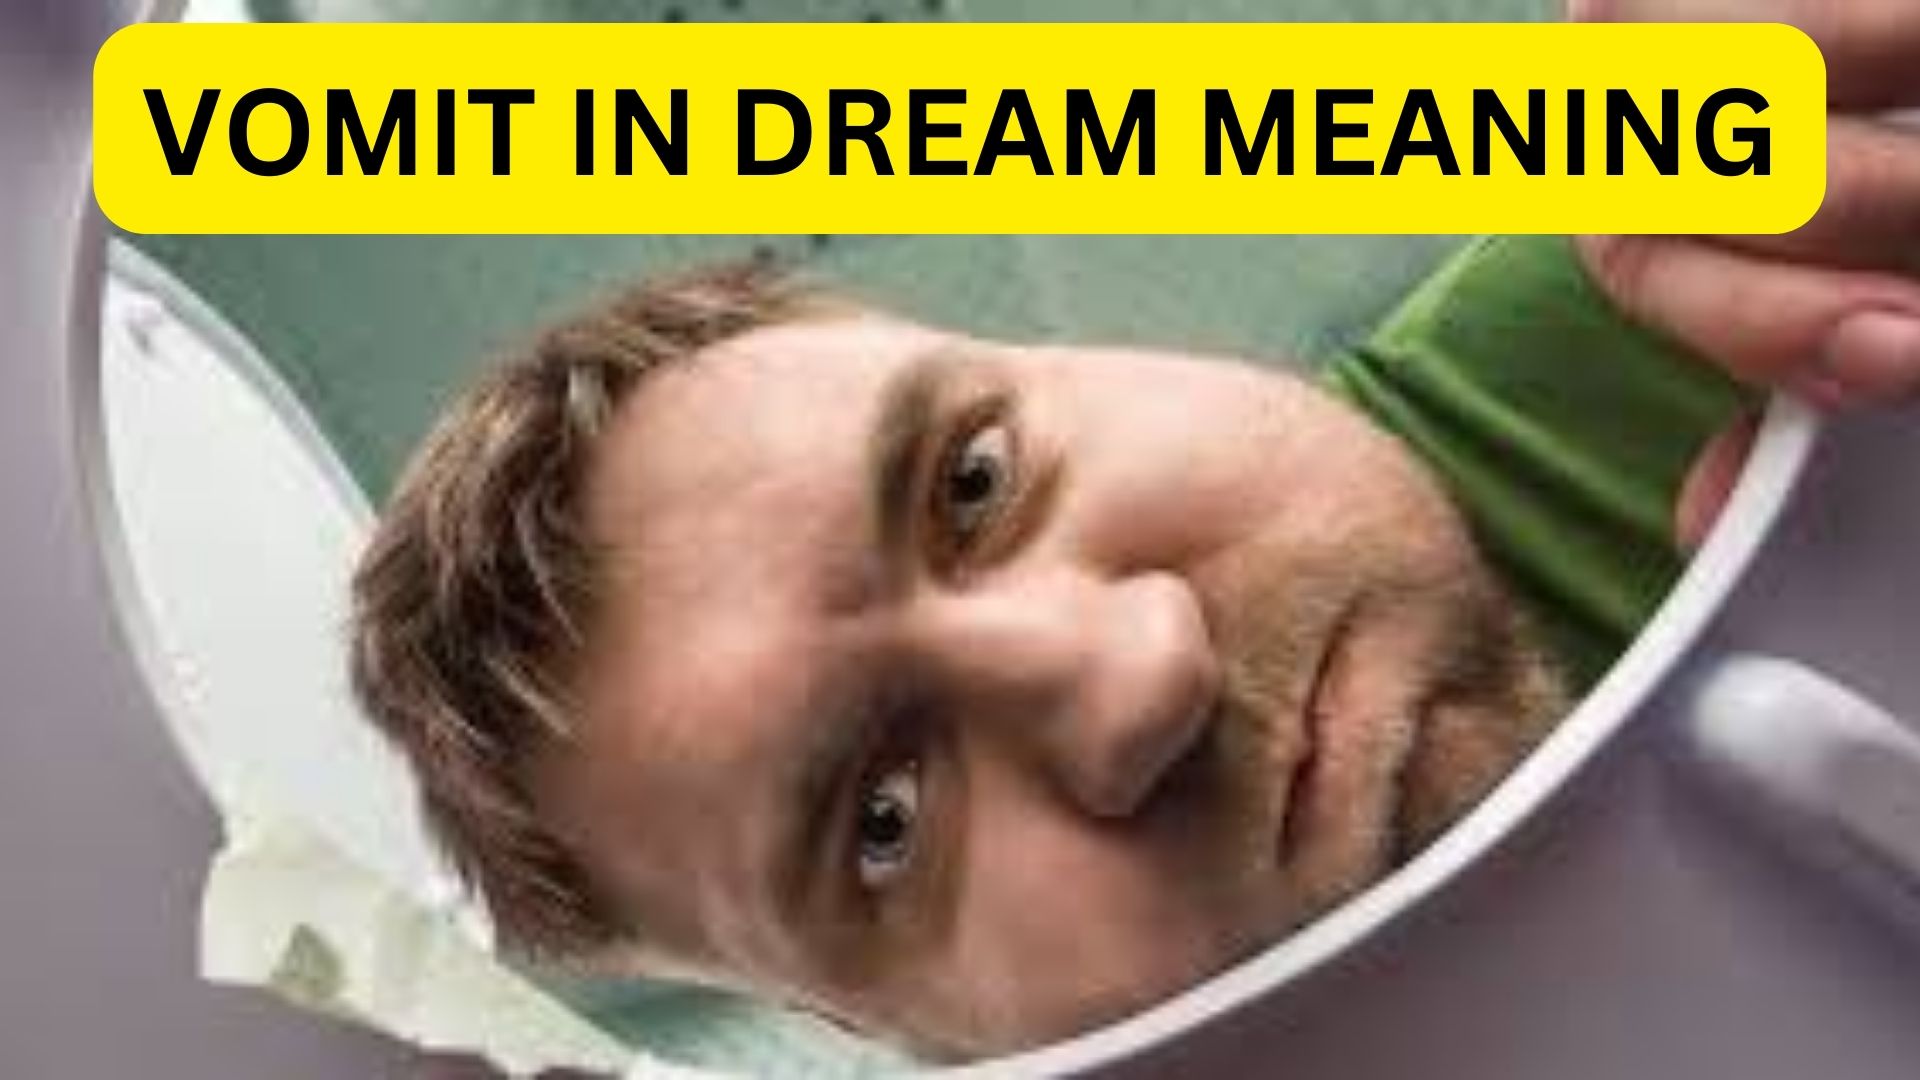 Vomit In Dream Meaning - Dissatisfaction With Life In General